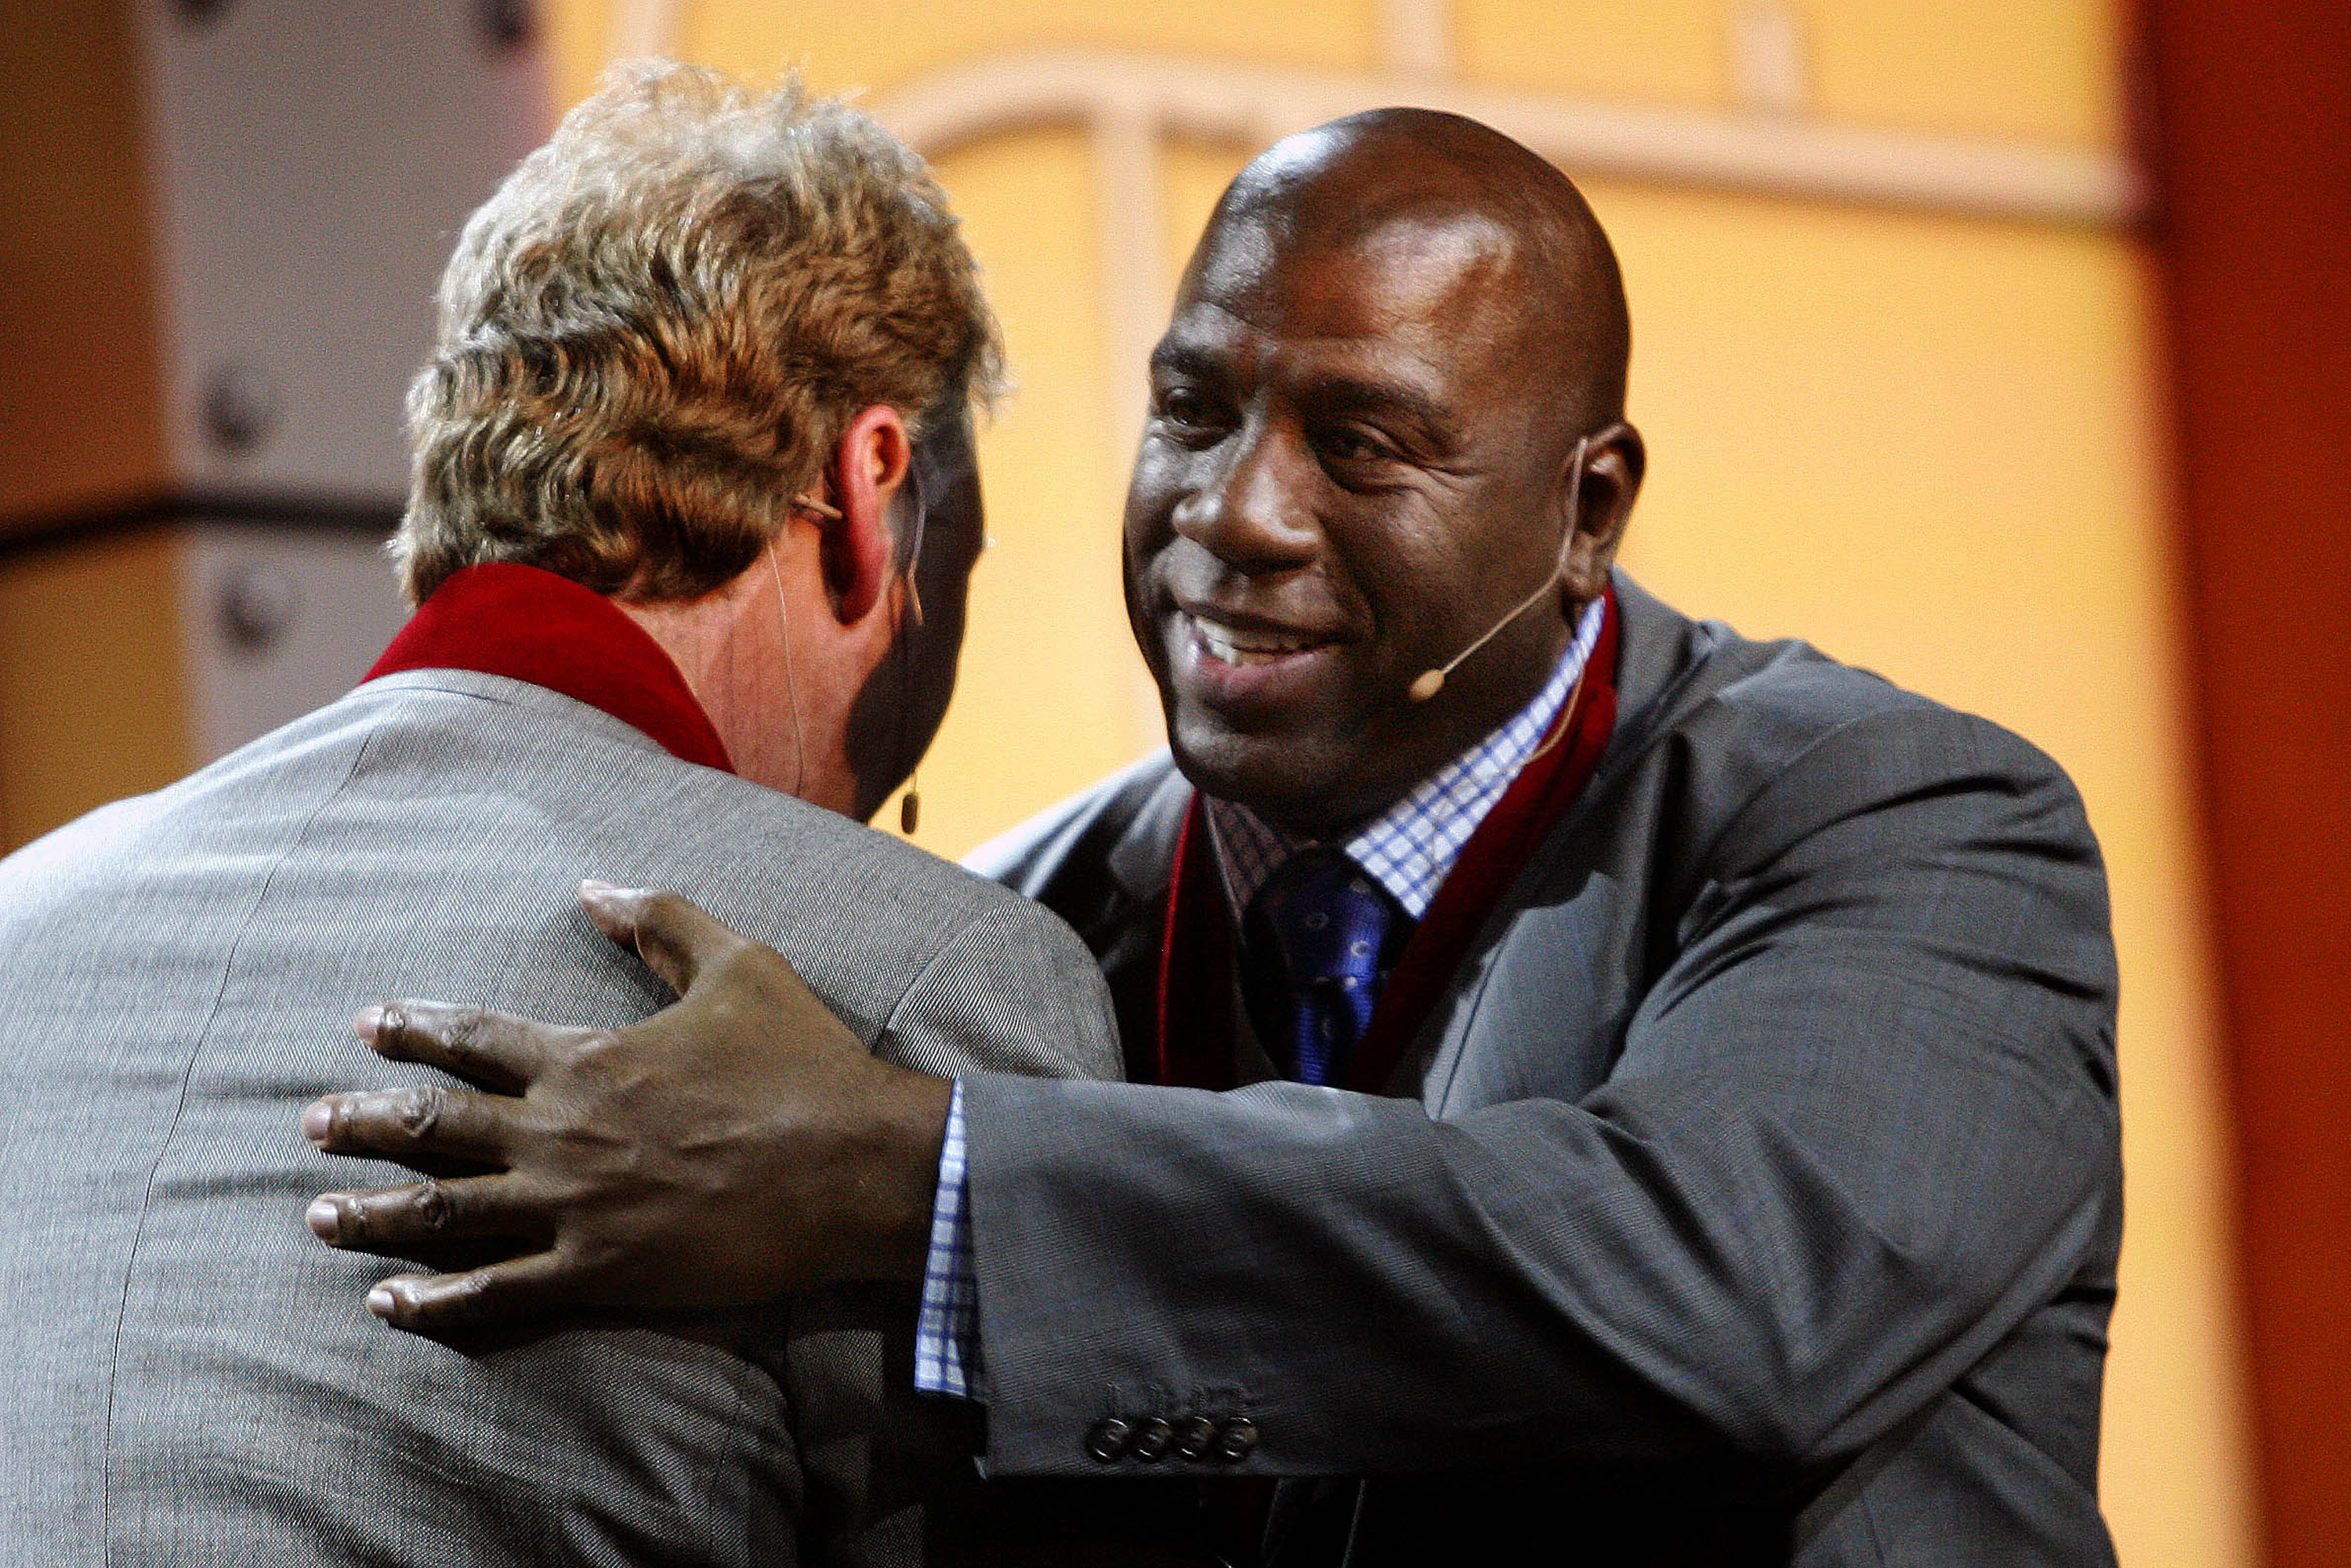 Earvin "Magic" Johnson and Larry Bird were inducted into the National Collegiate Basketball Hall of Fame in 2009.